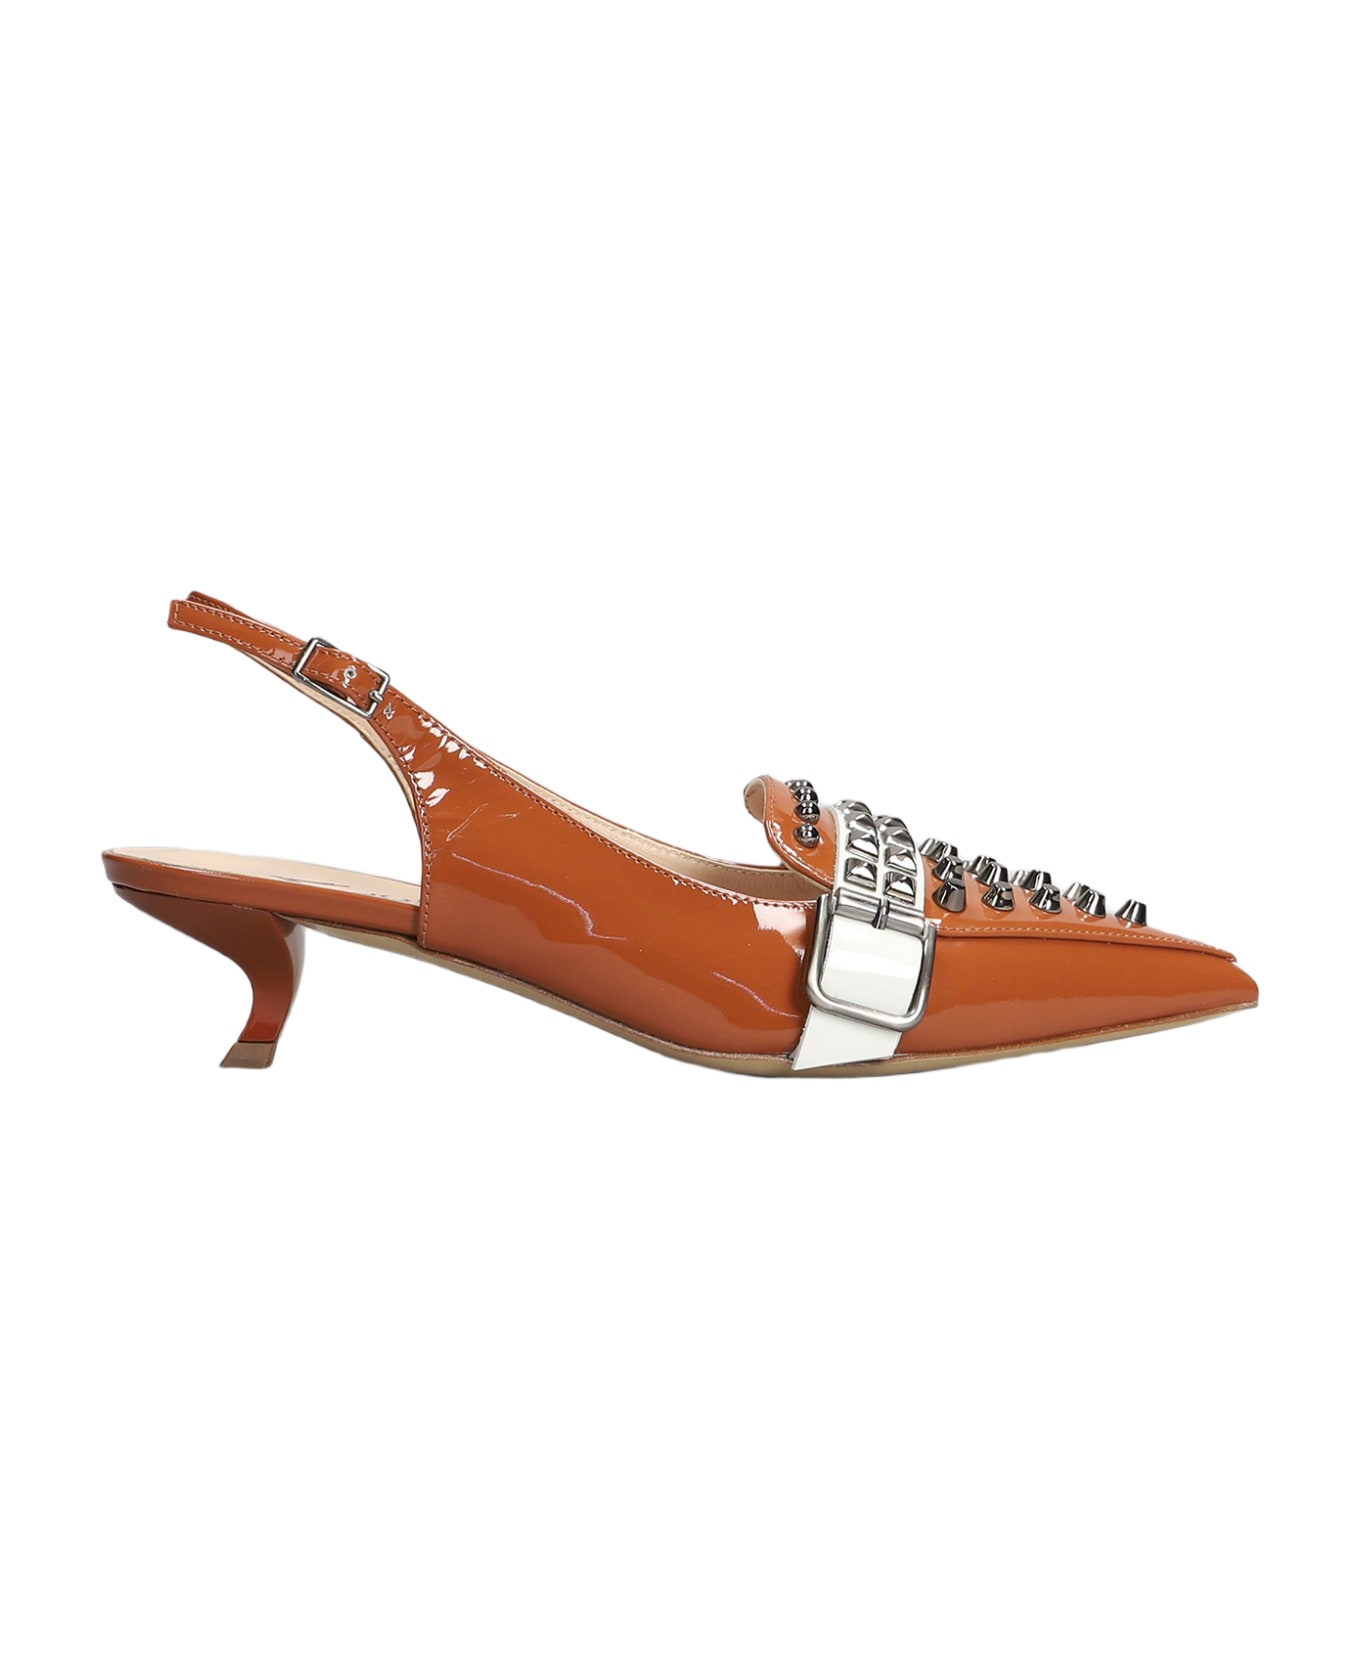 Alchimia Pumps In Leather Color Patent Leather - leather color